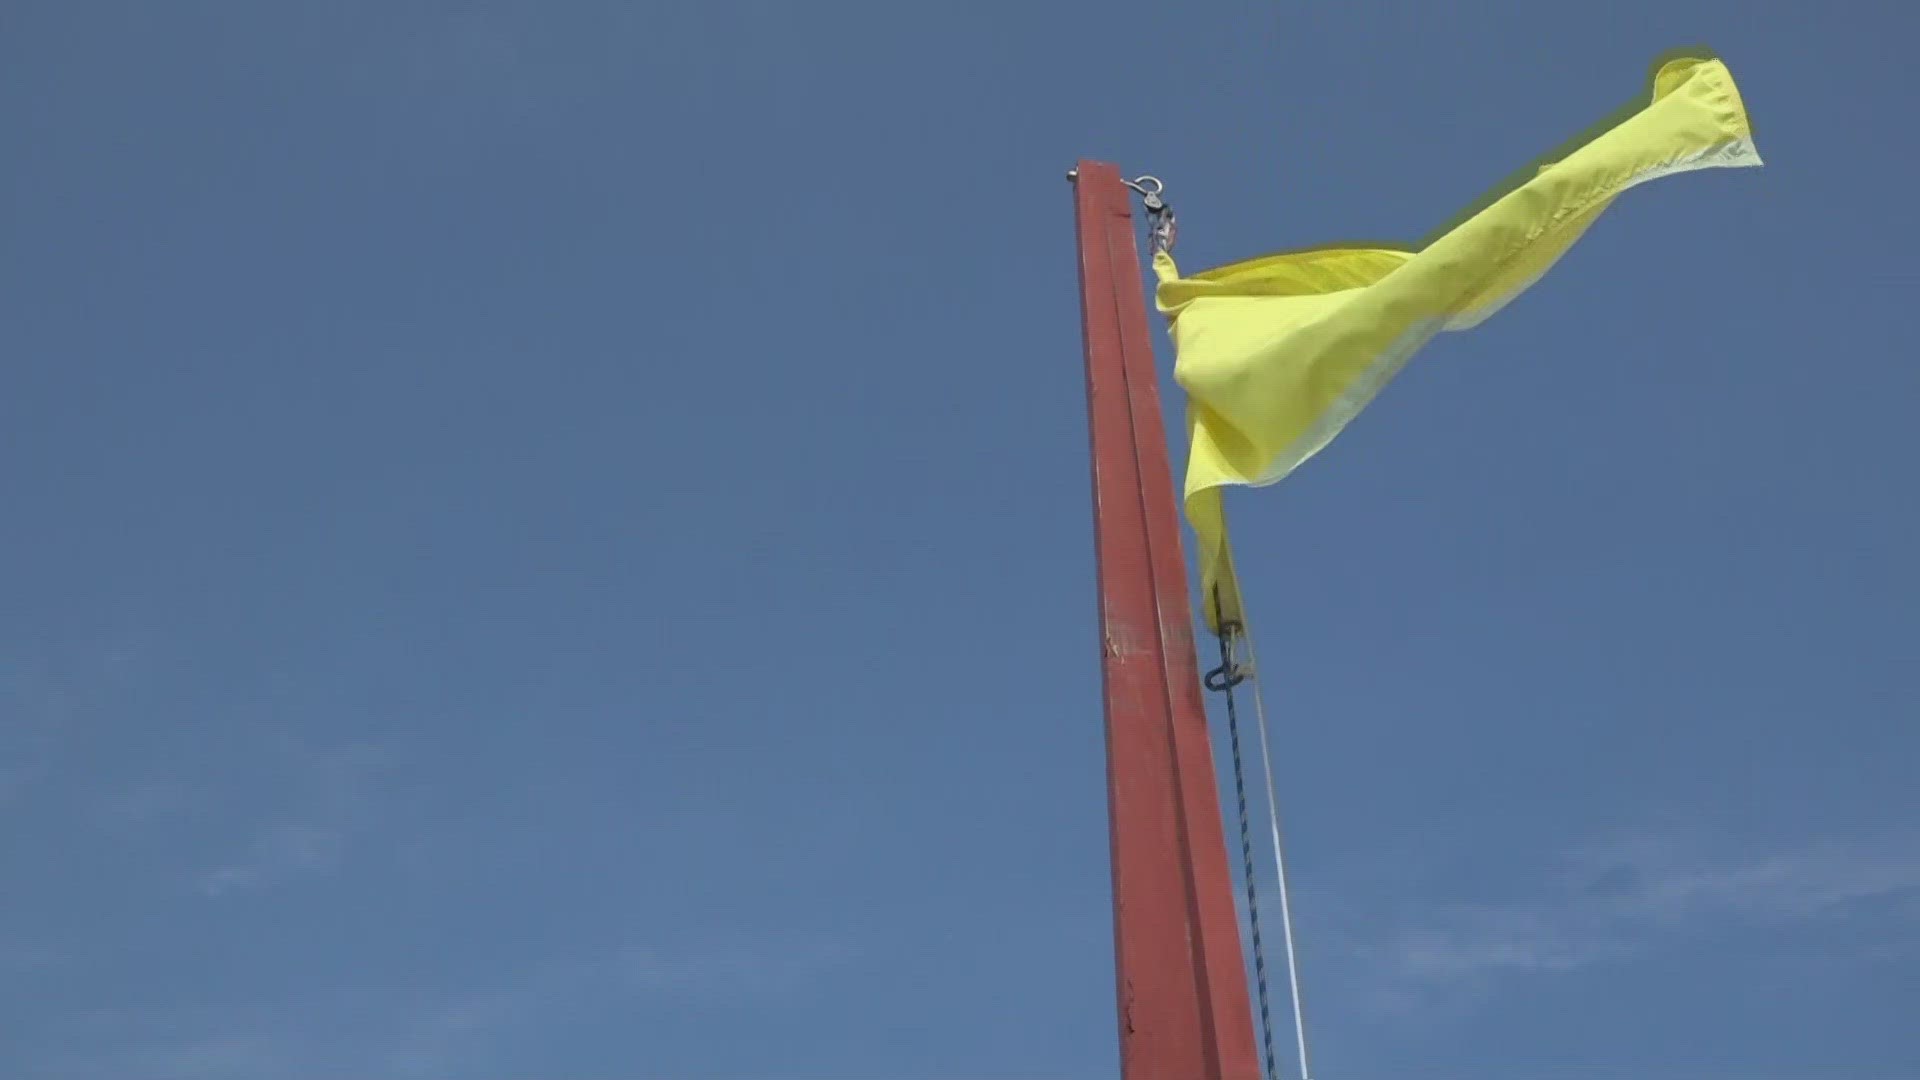 Pay attention to the color of the flags being flown next time you visit the beach.